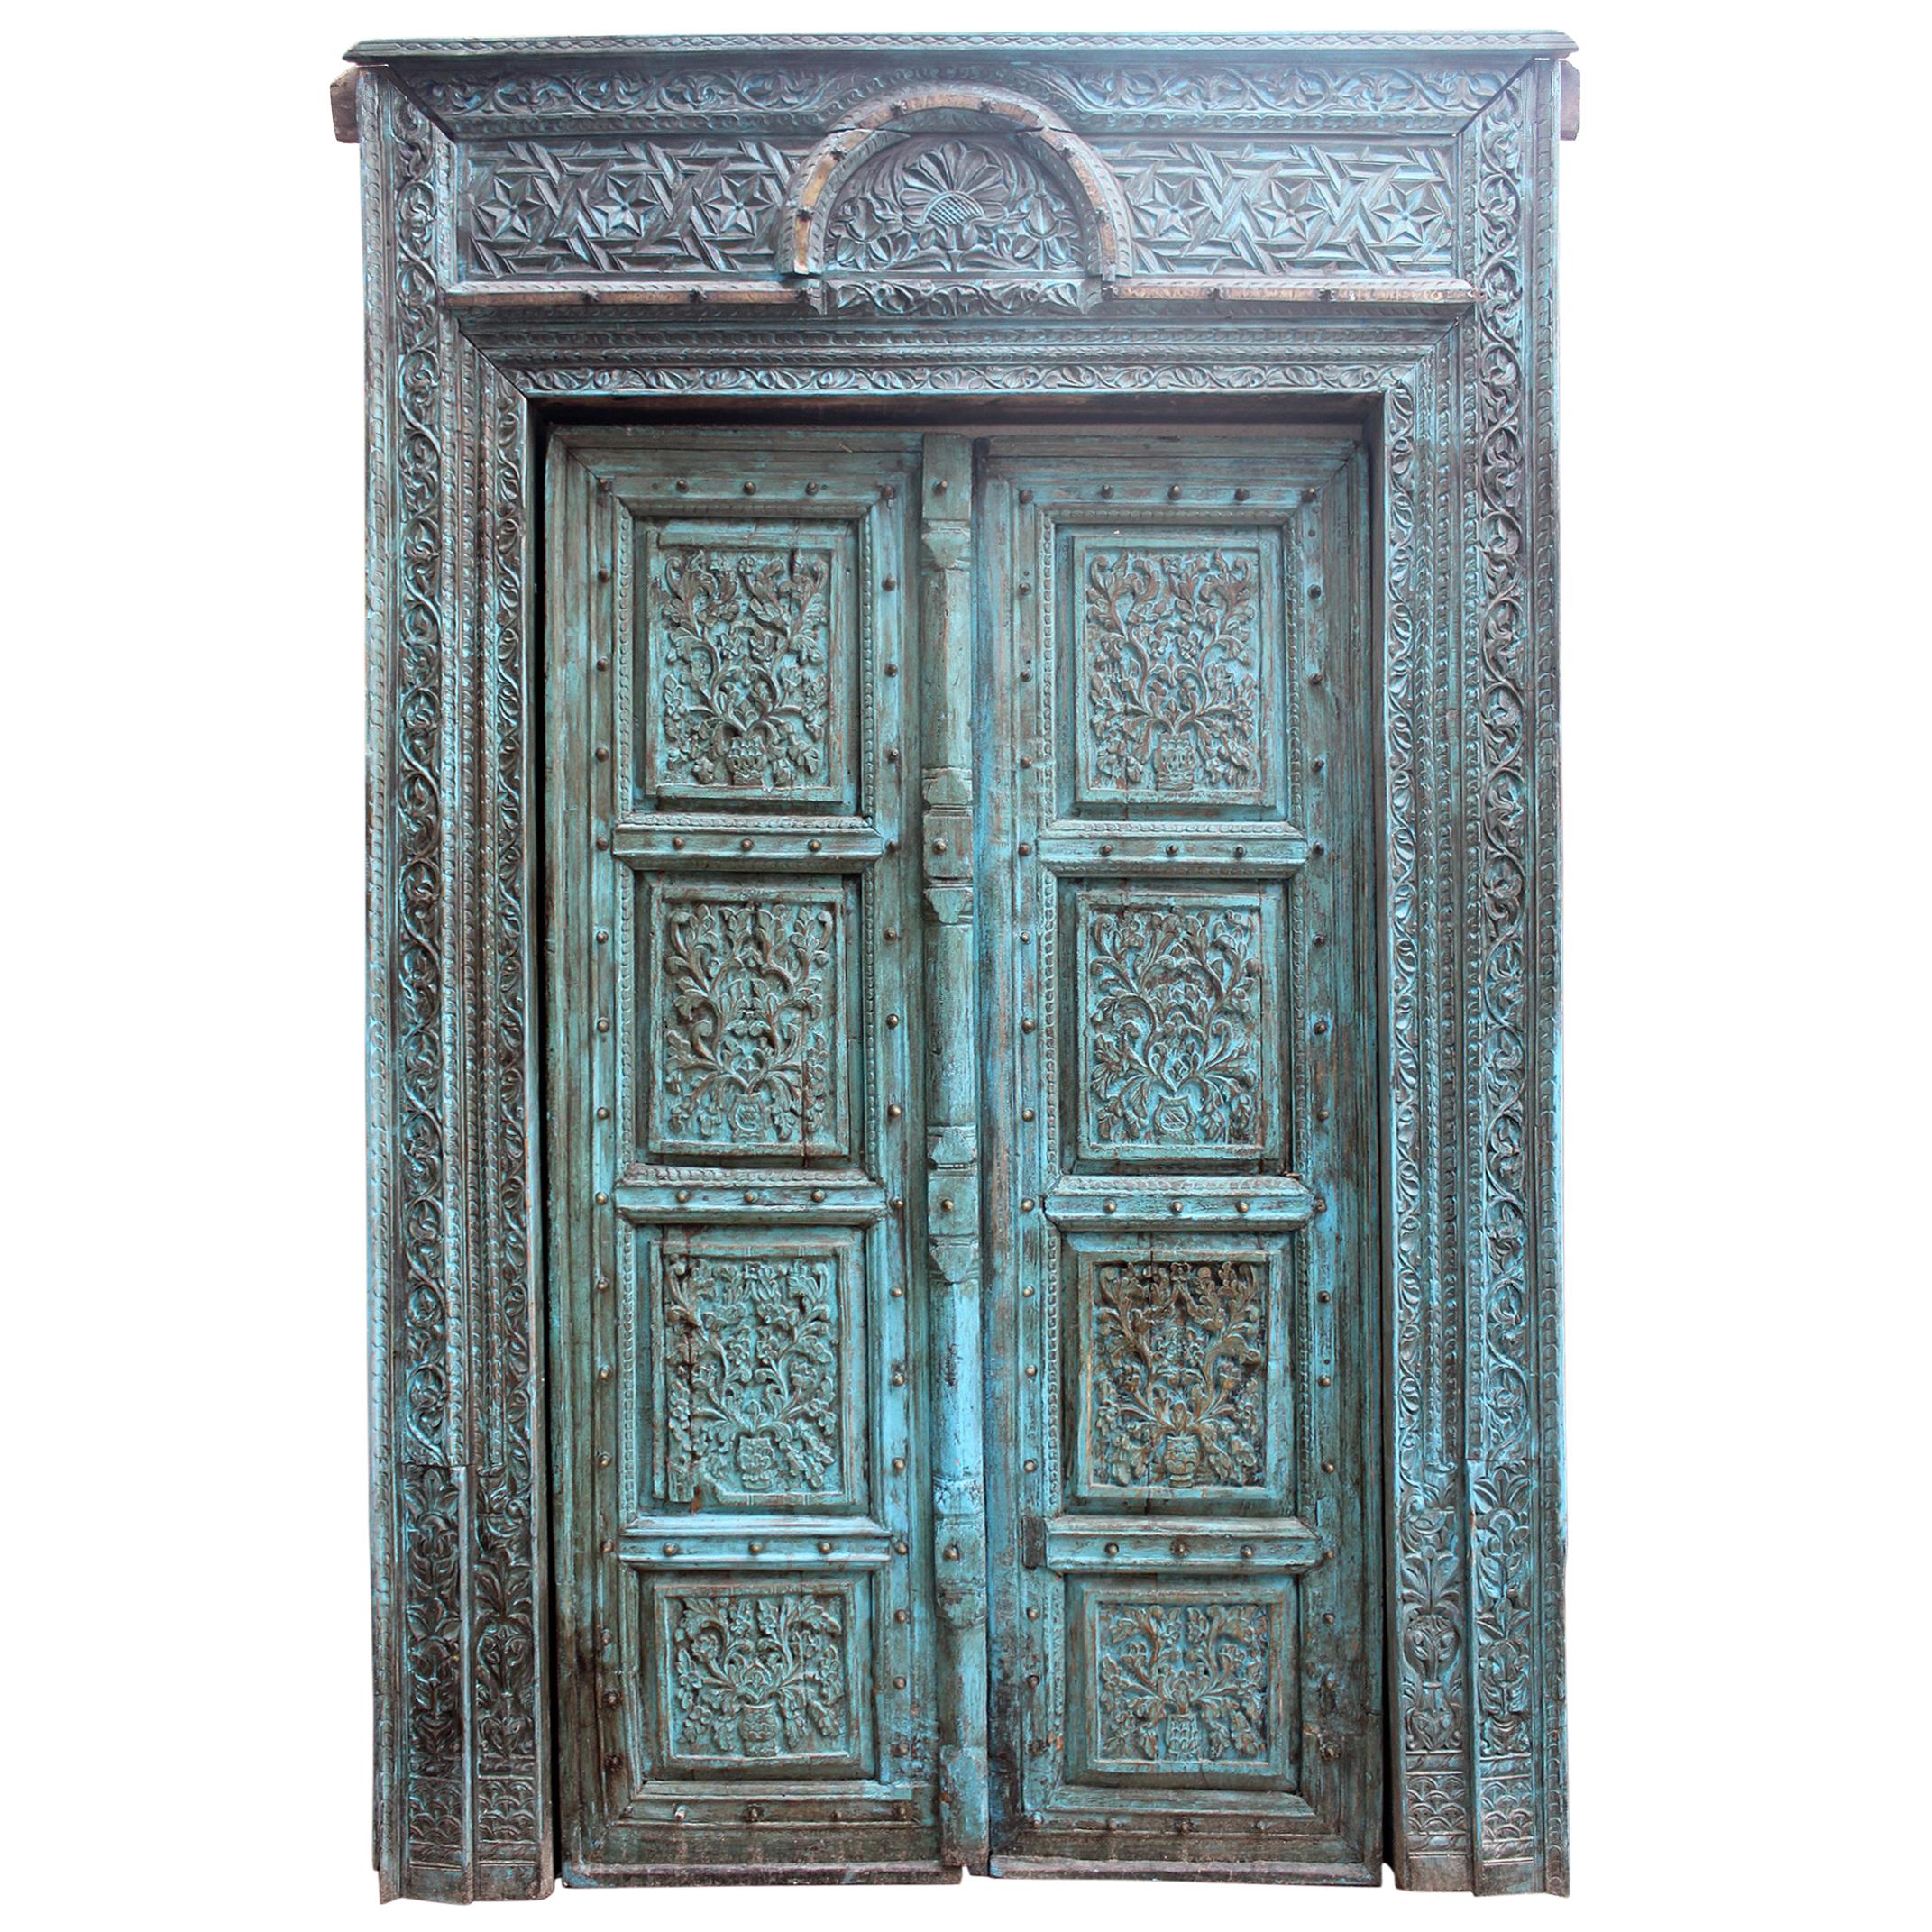 19th Century Complete Indian Wooden Main Door with Original Polychrome